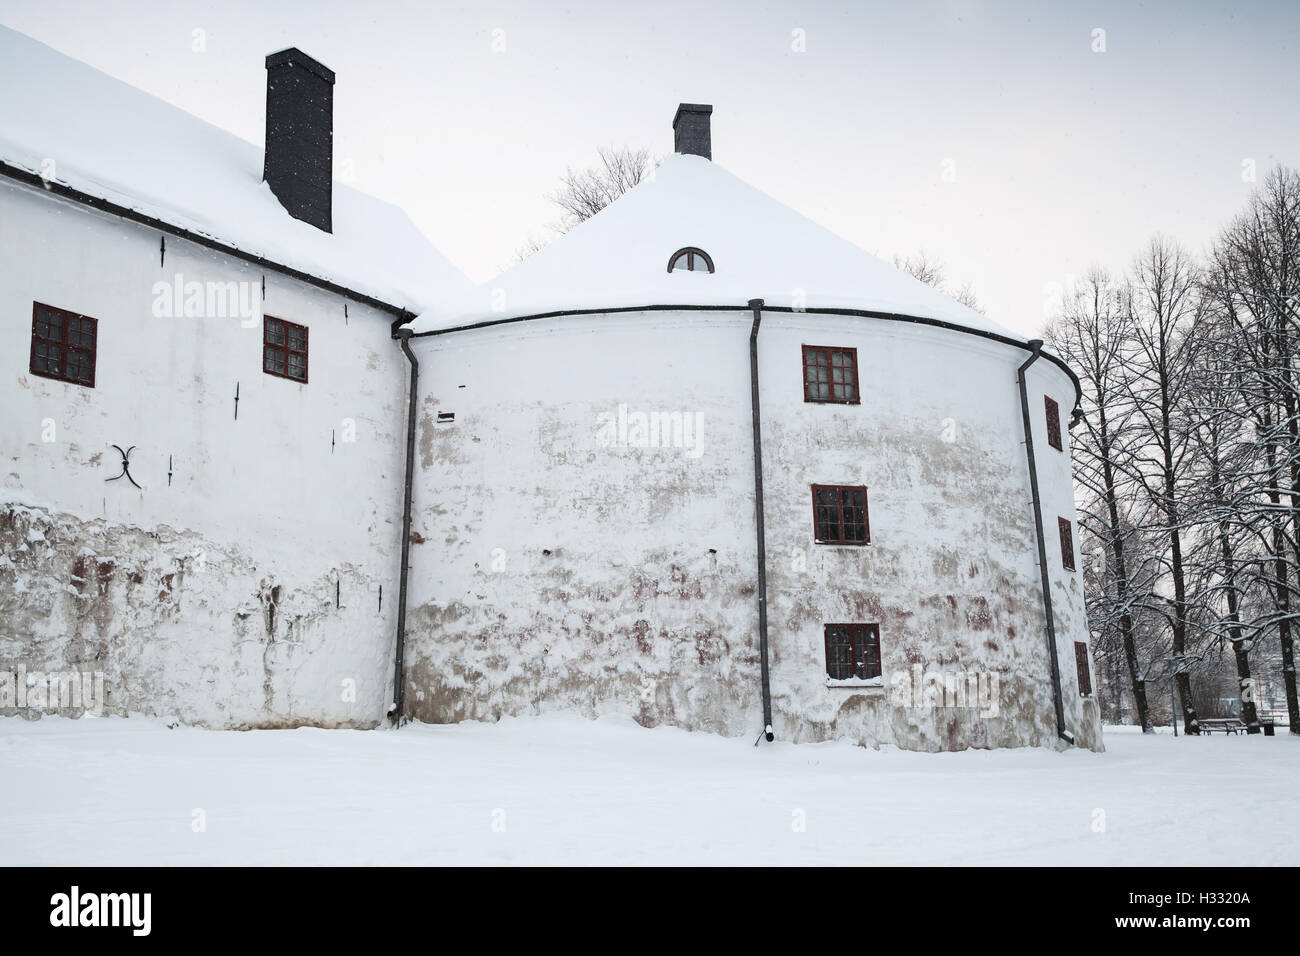 Turku, Finland - January 17, 2016: White round tower facade of Turku castle bailey in winter day Stock Photo